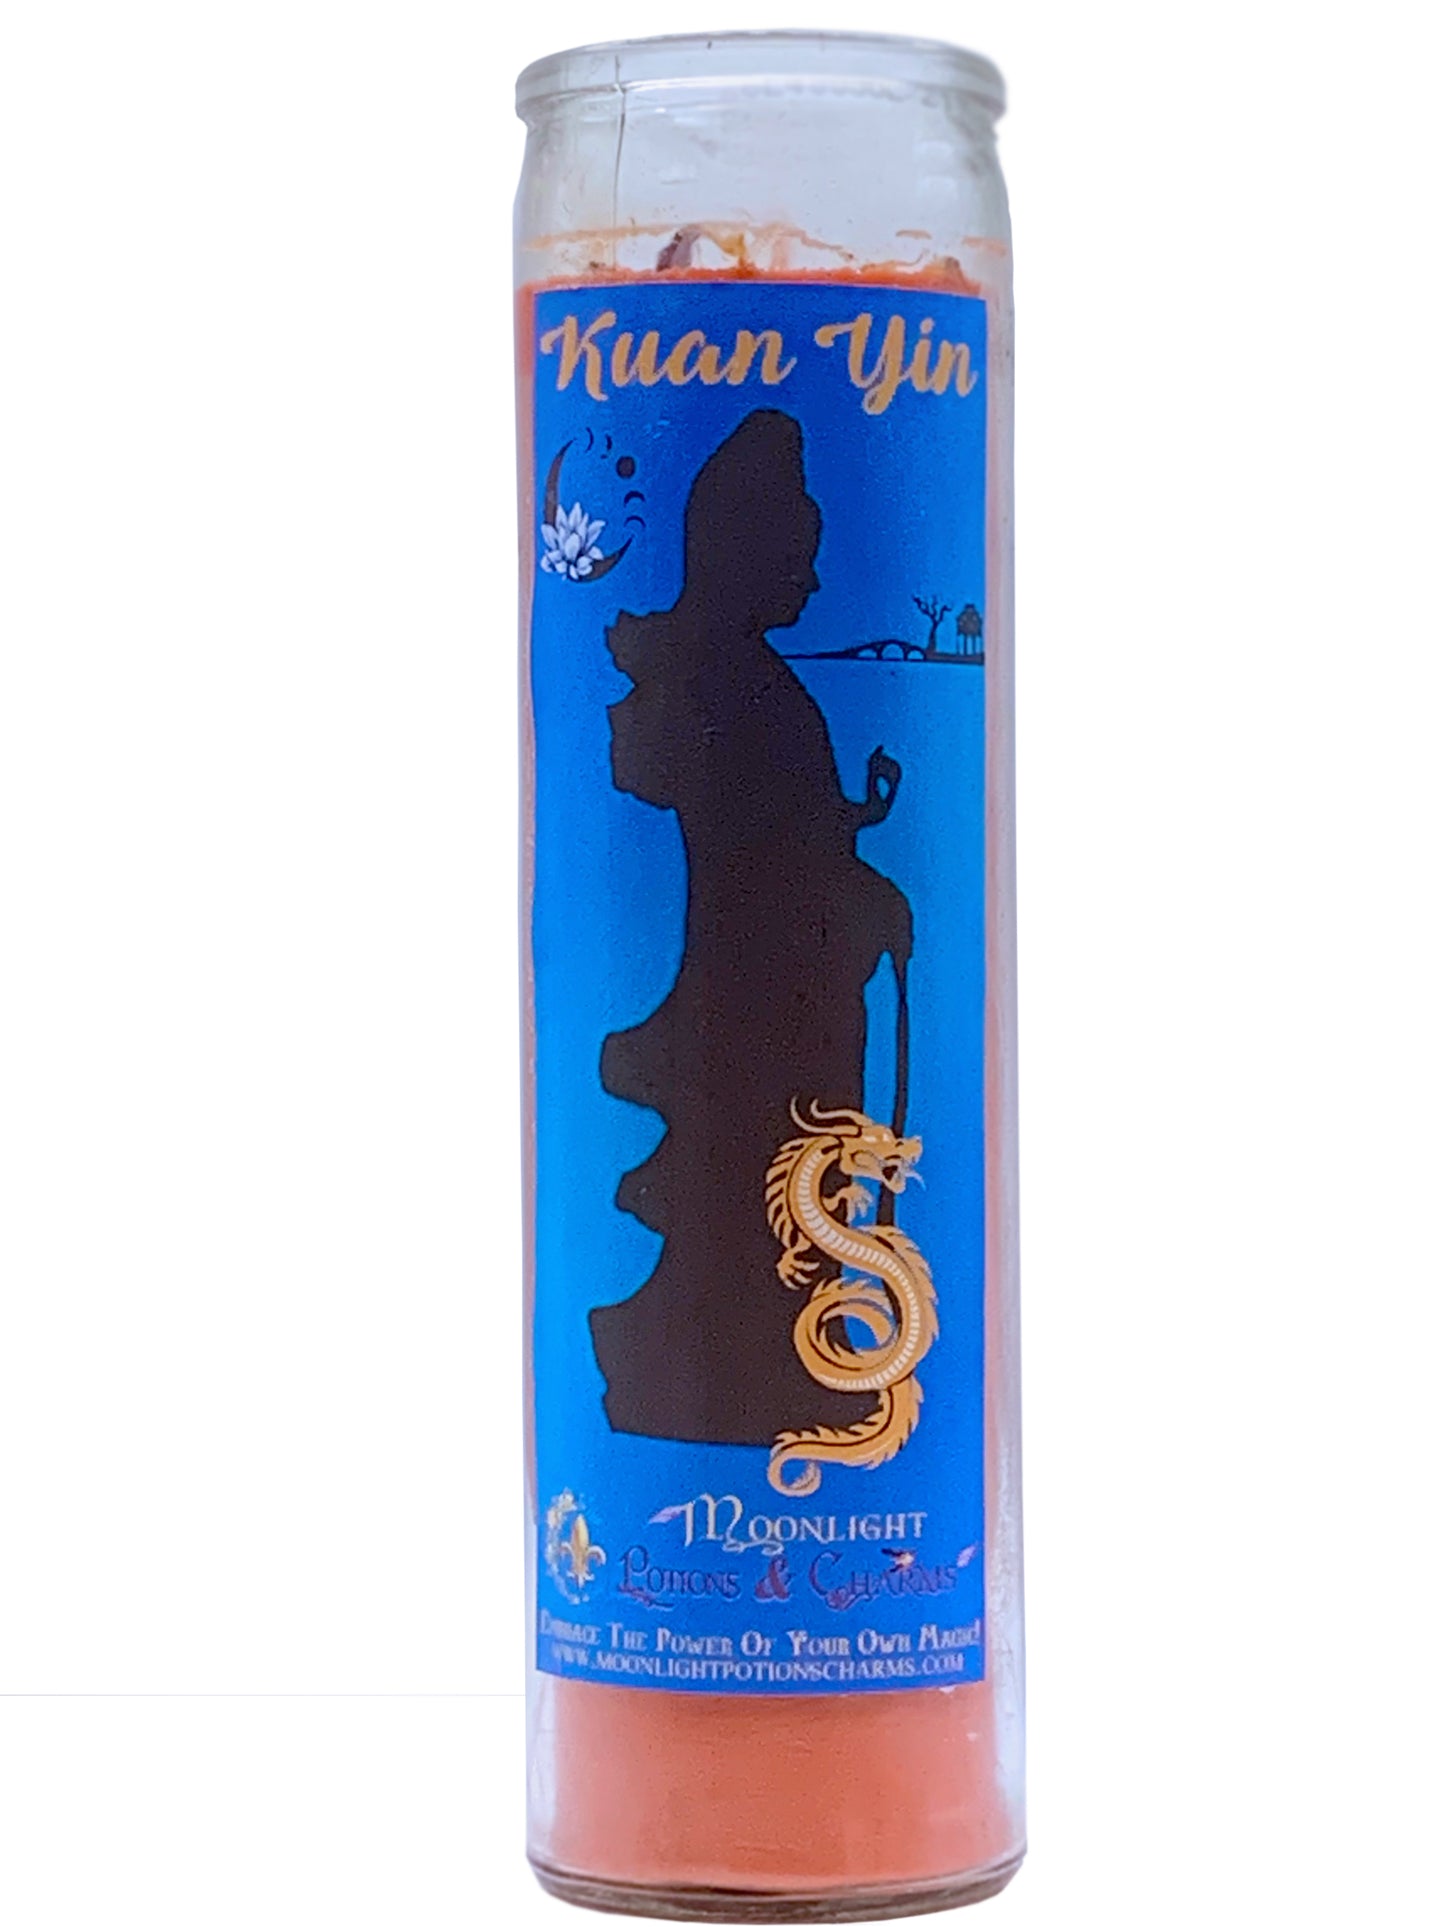 Kwan Yin Prayer Candle, Front - Moonlight Potions & Charms